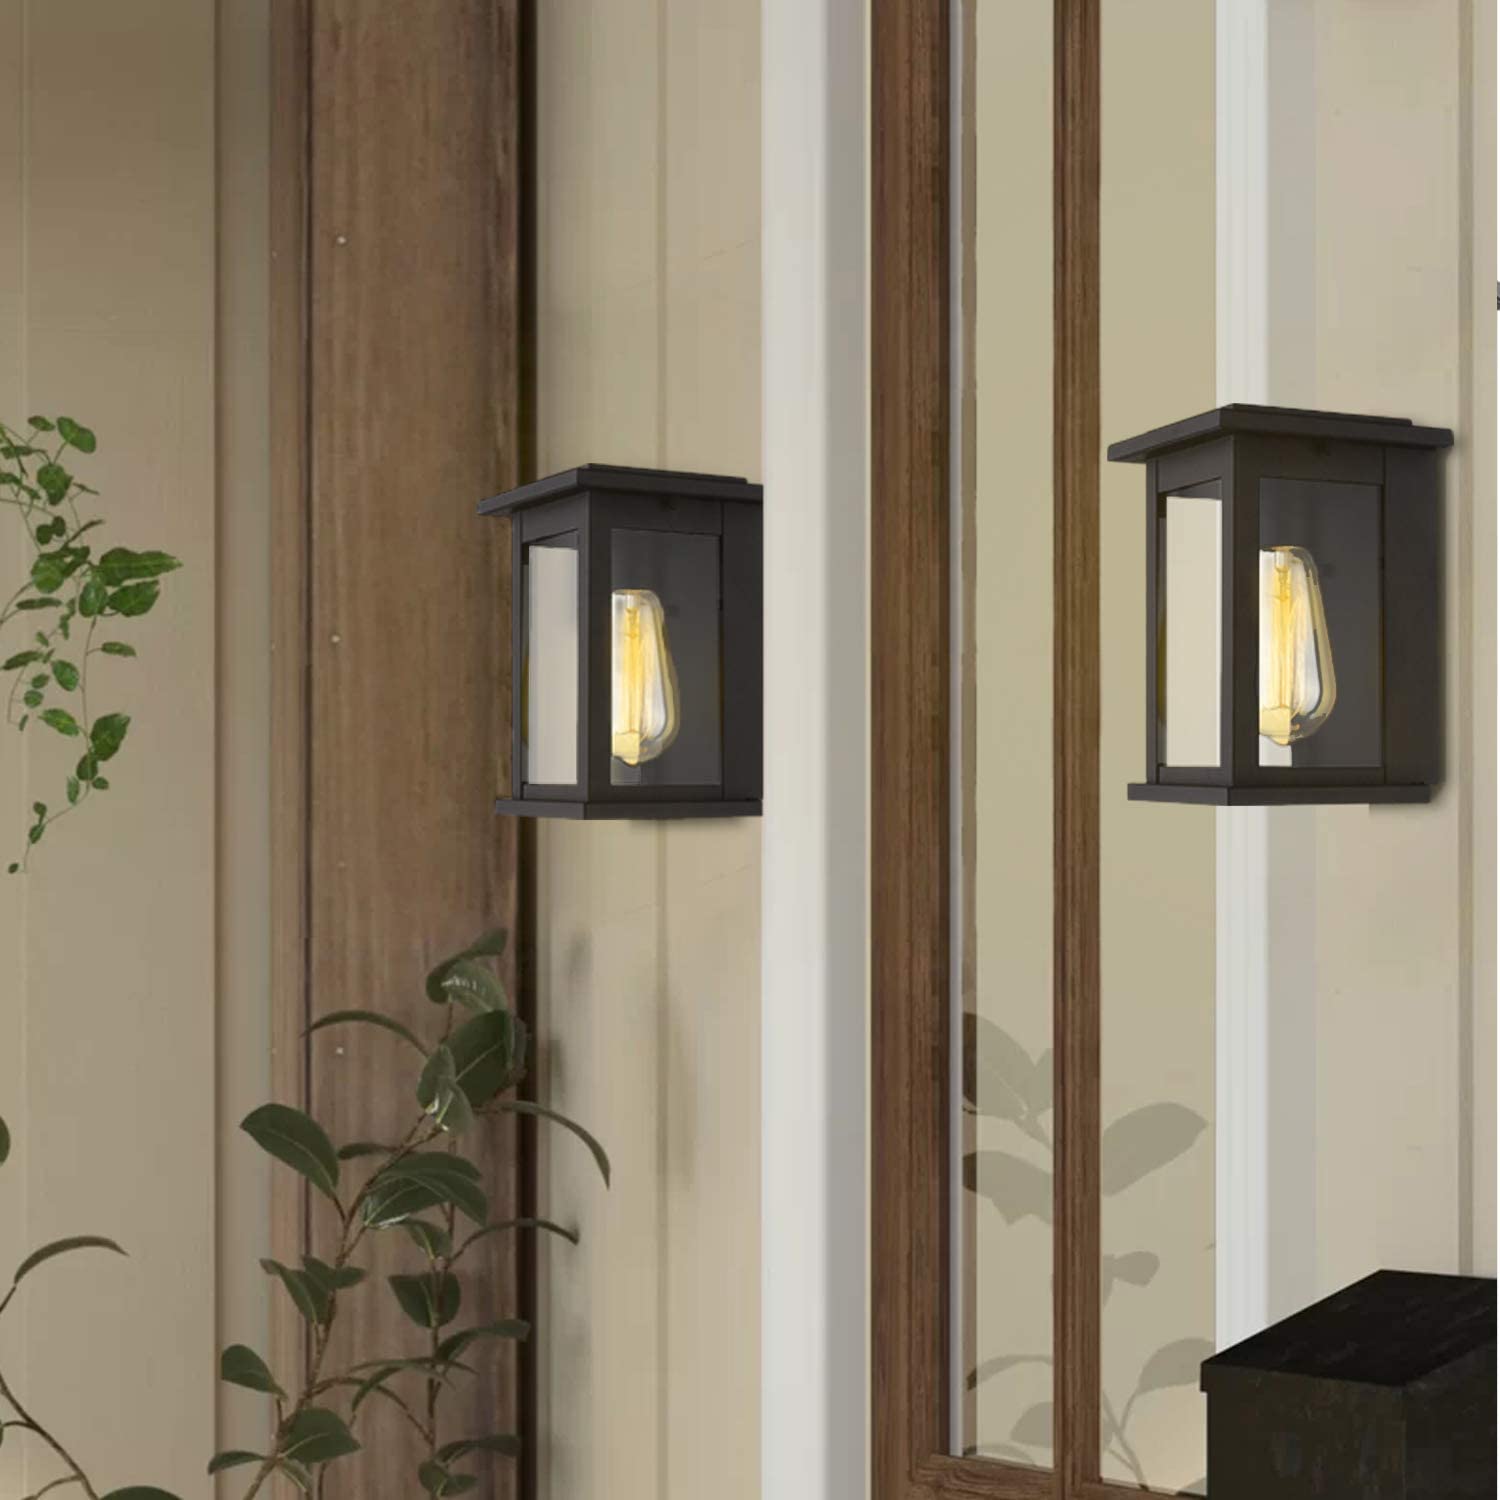 Square outdoor wall sconce light fixture black glass wall lamp